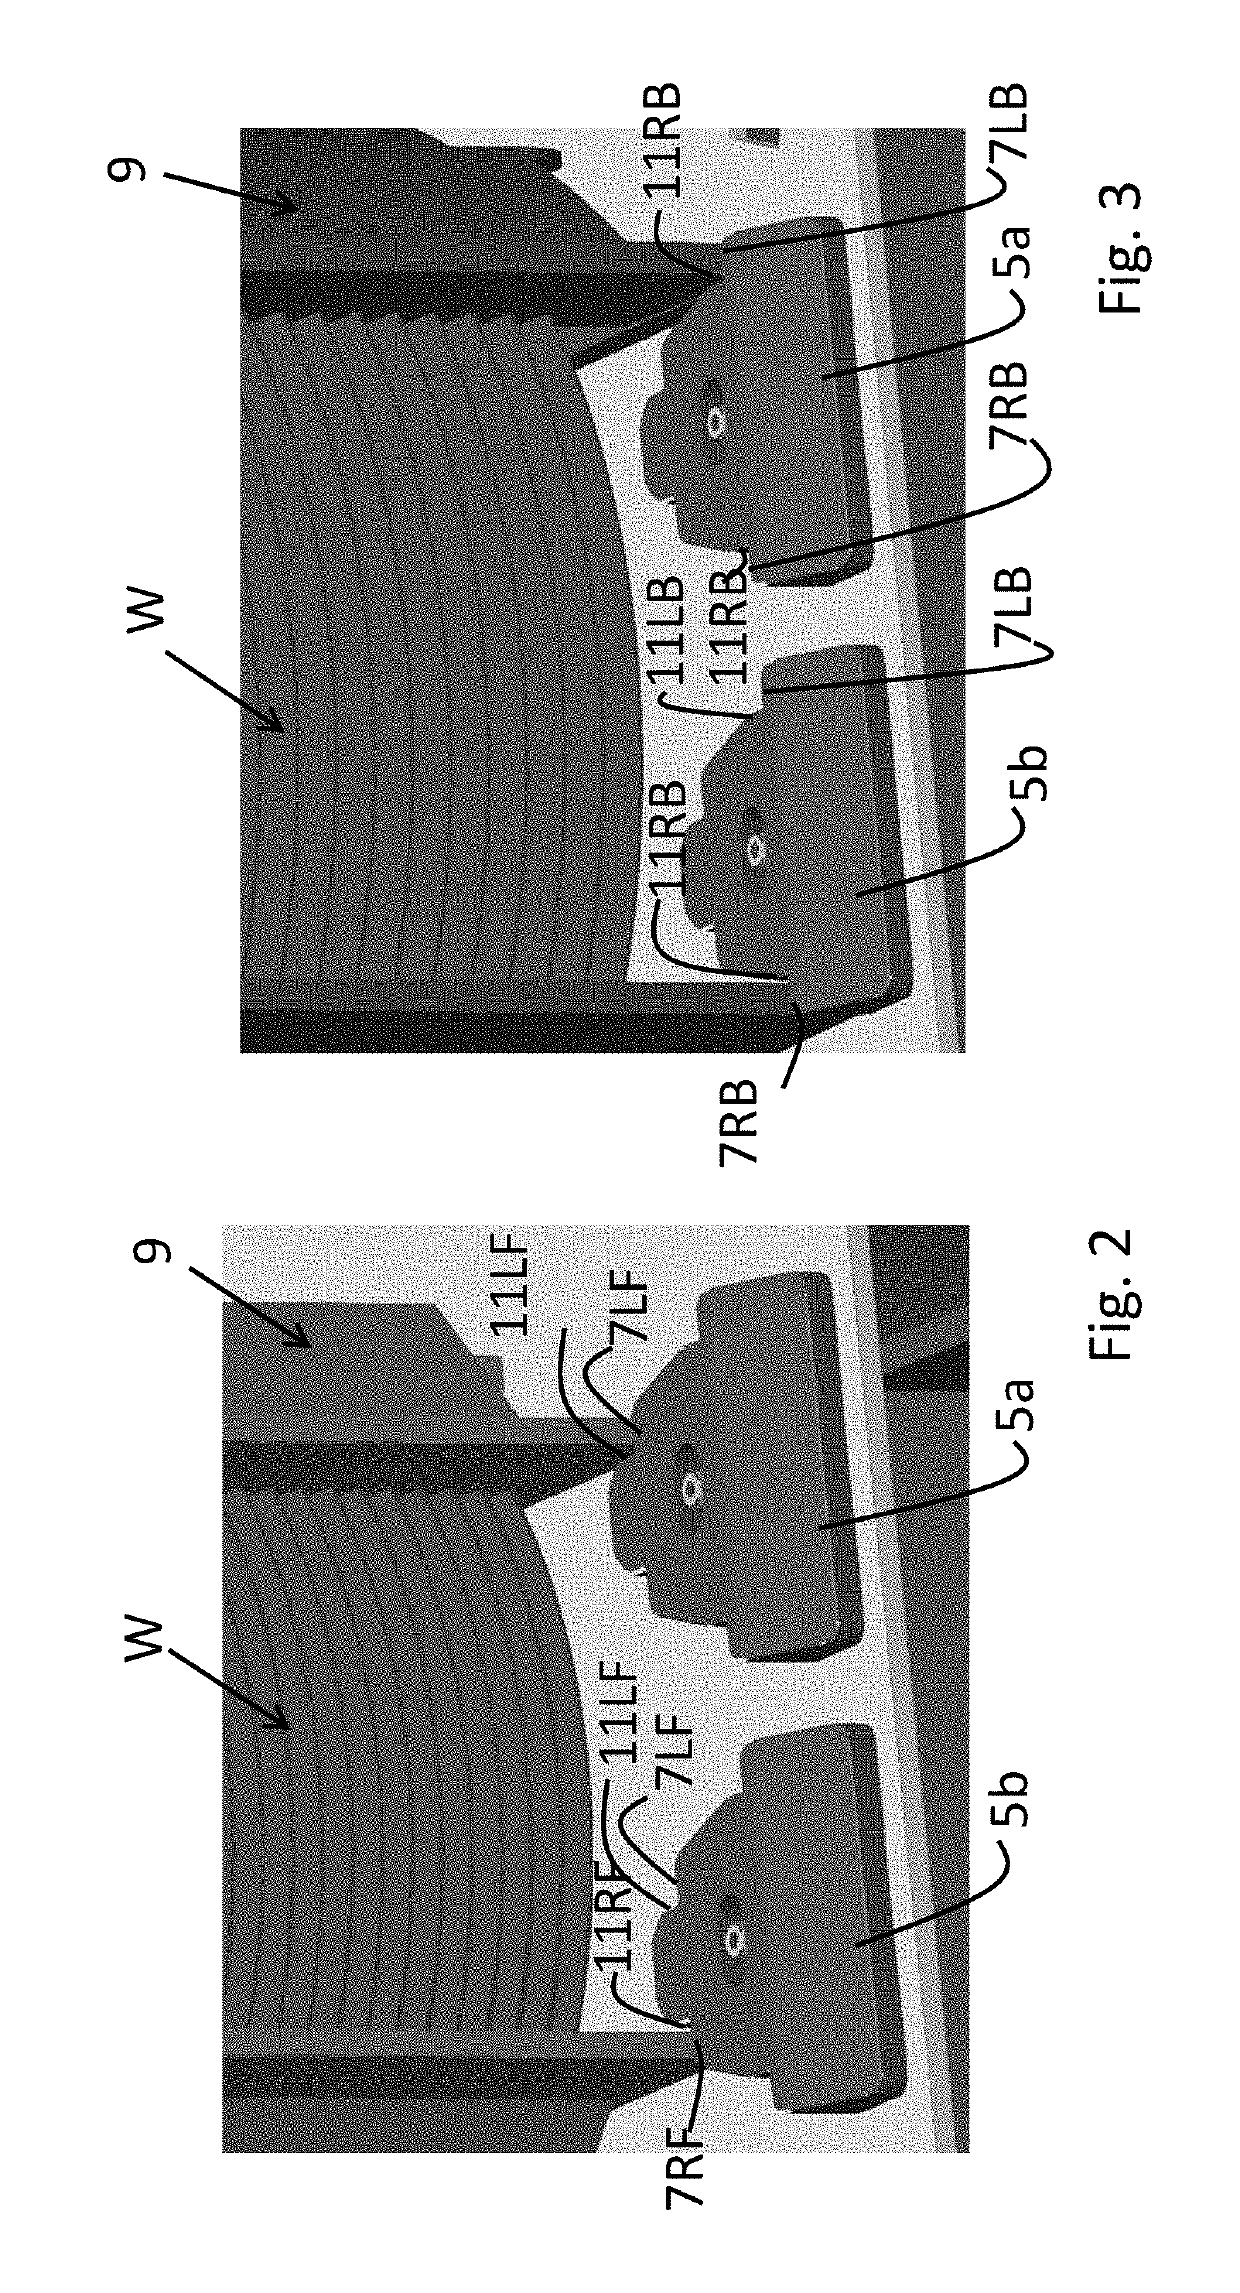 Cassette holder assembly for a substrate cassette and holding member for use in such assembly